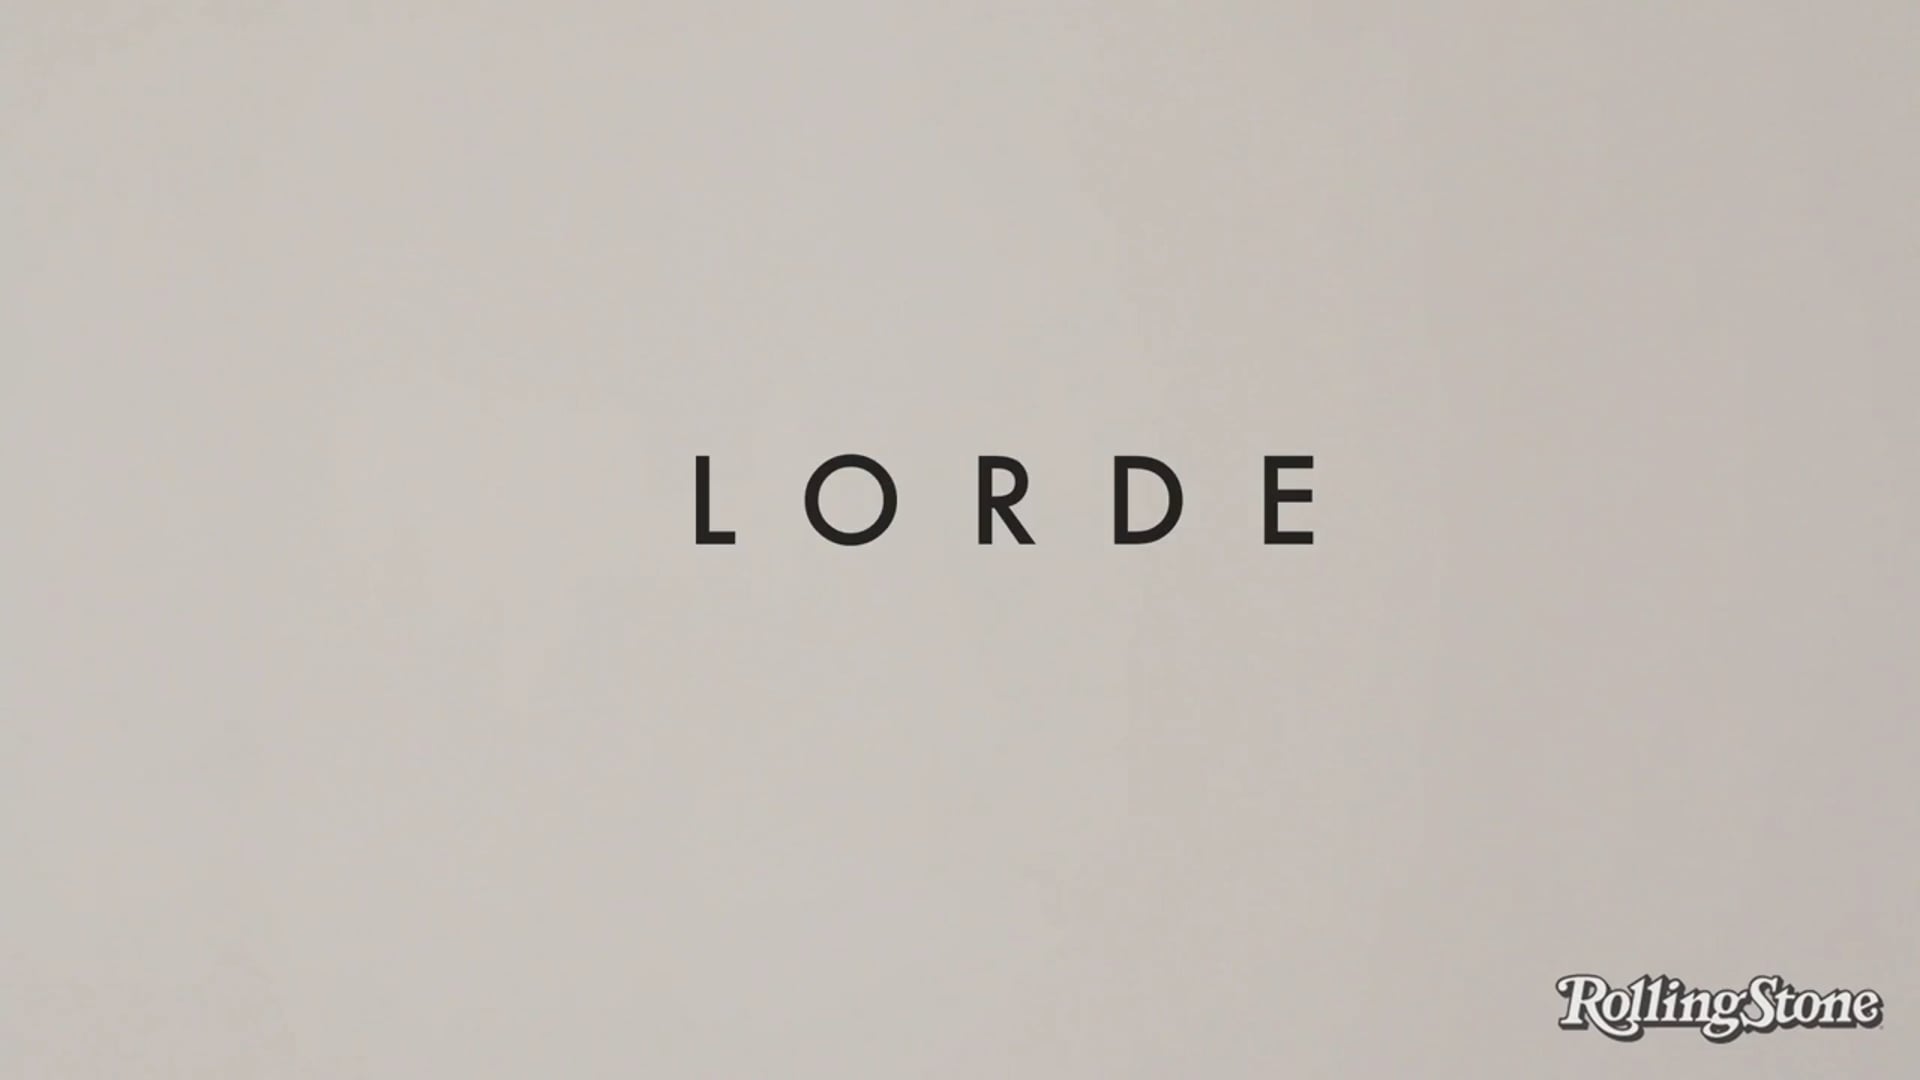 Lessons from Lorde